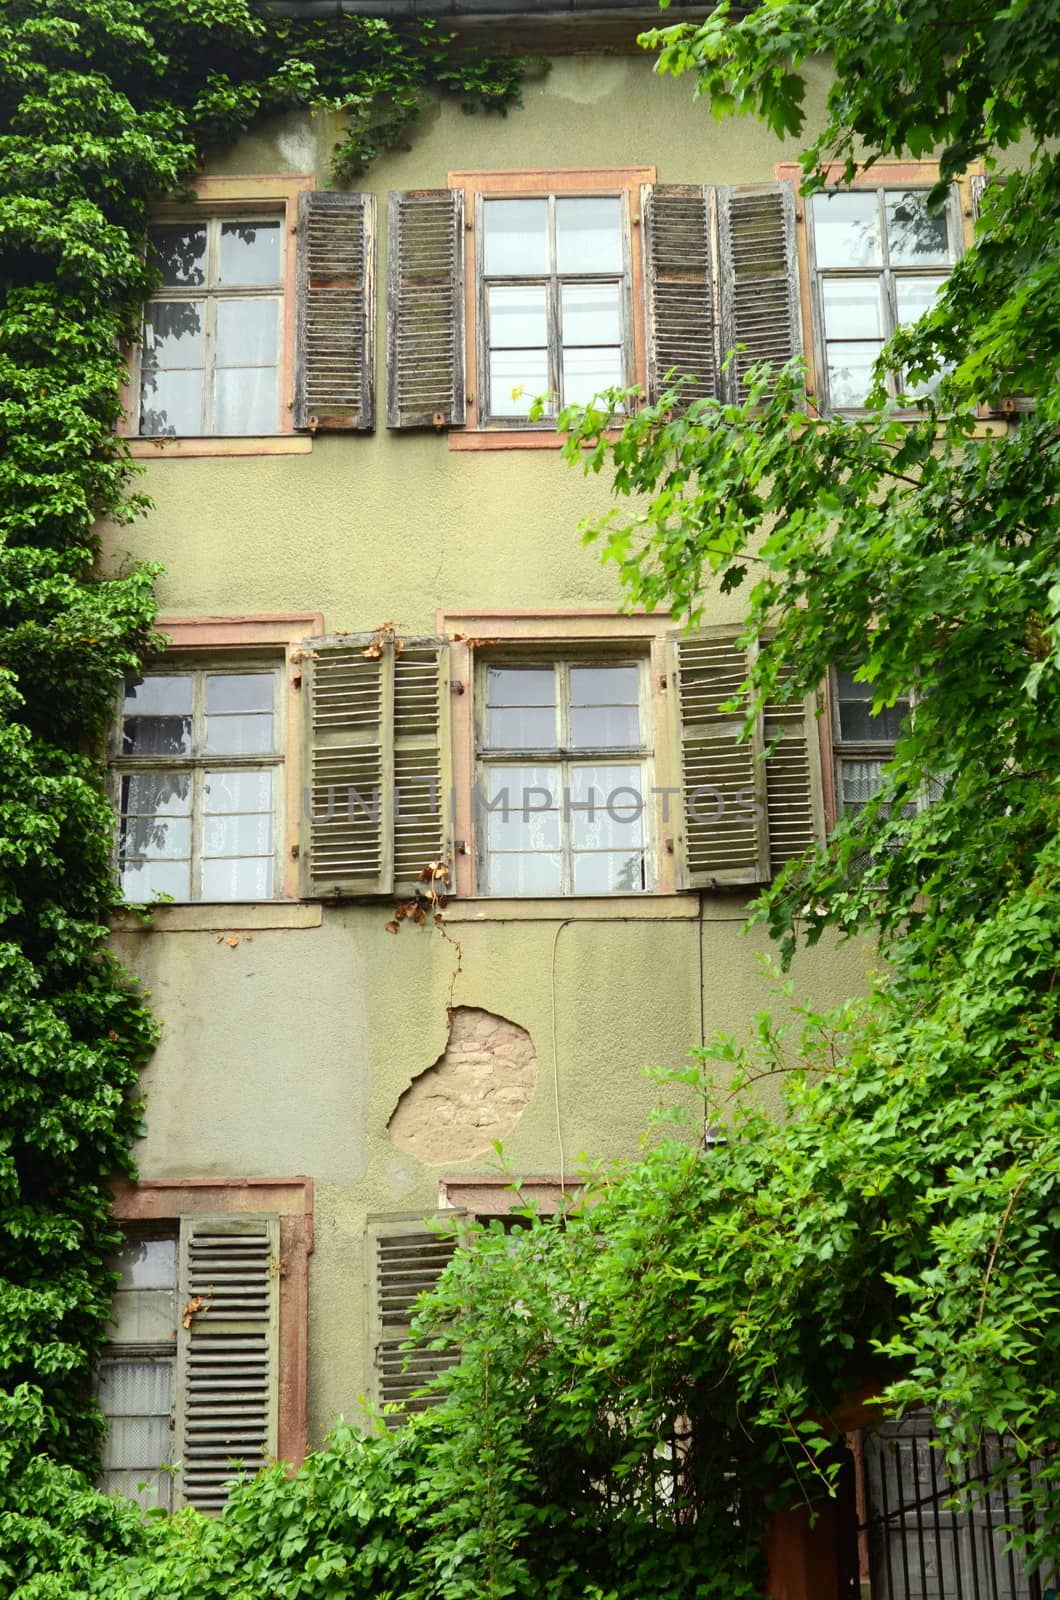 An Overgrown Derelict House In Europe With Shutters